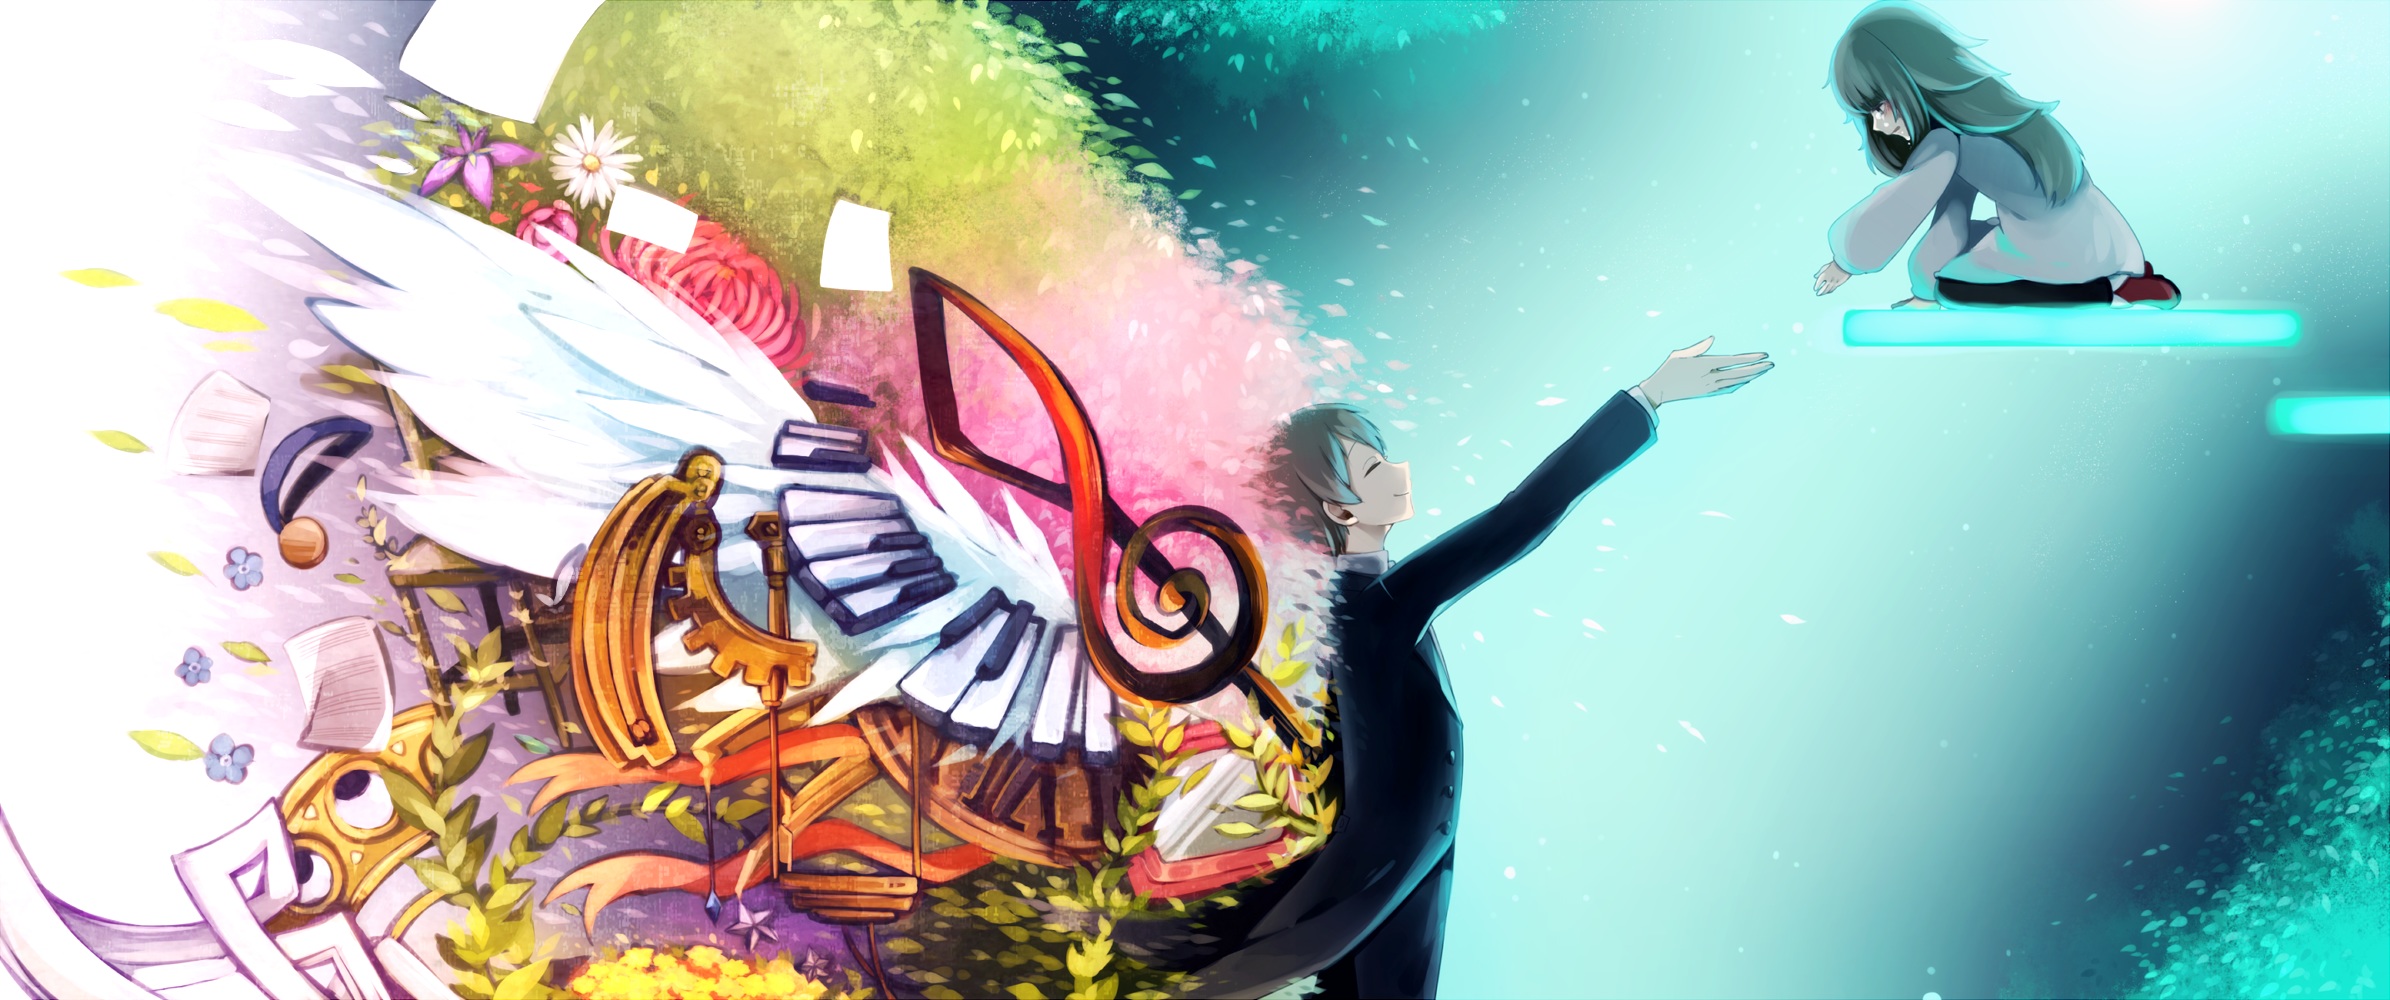 Video Game Deemo HD Wallpaper | Background Image